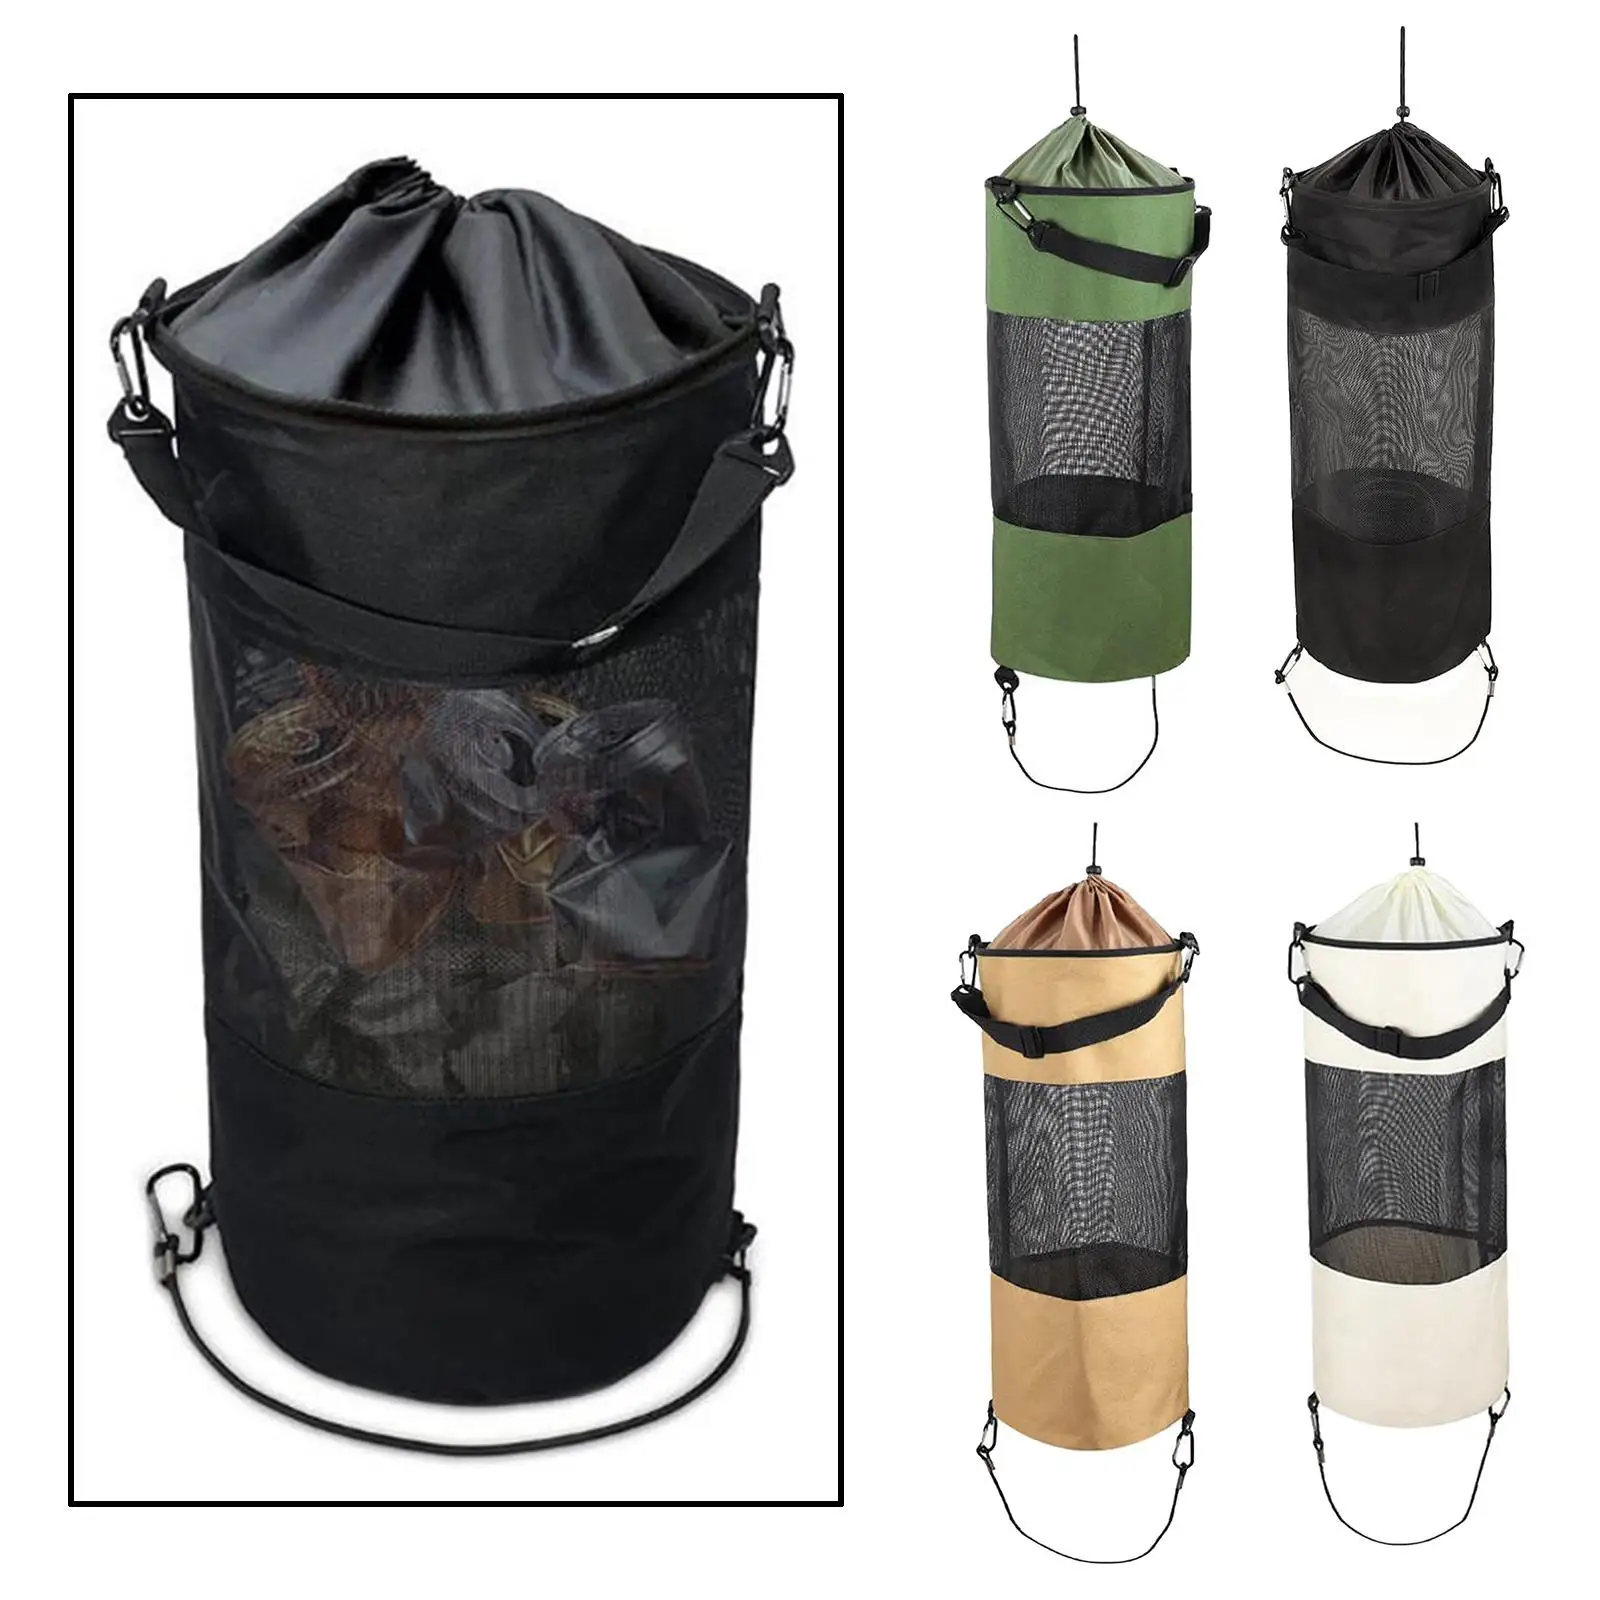 Foldable Reusable Mesh Portable-  Bag for Your Boat, Yacht, Kayak, Outdoor, or Campers